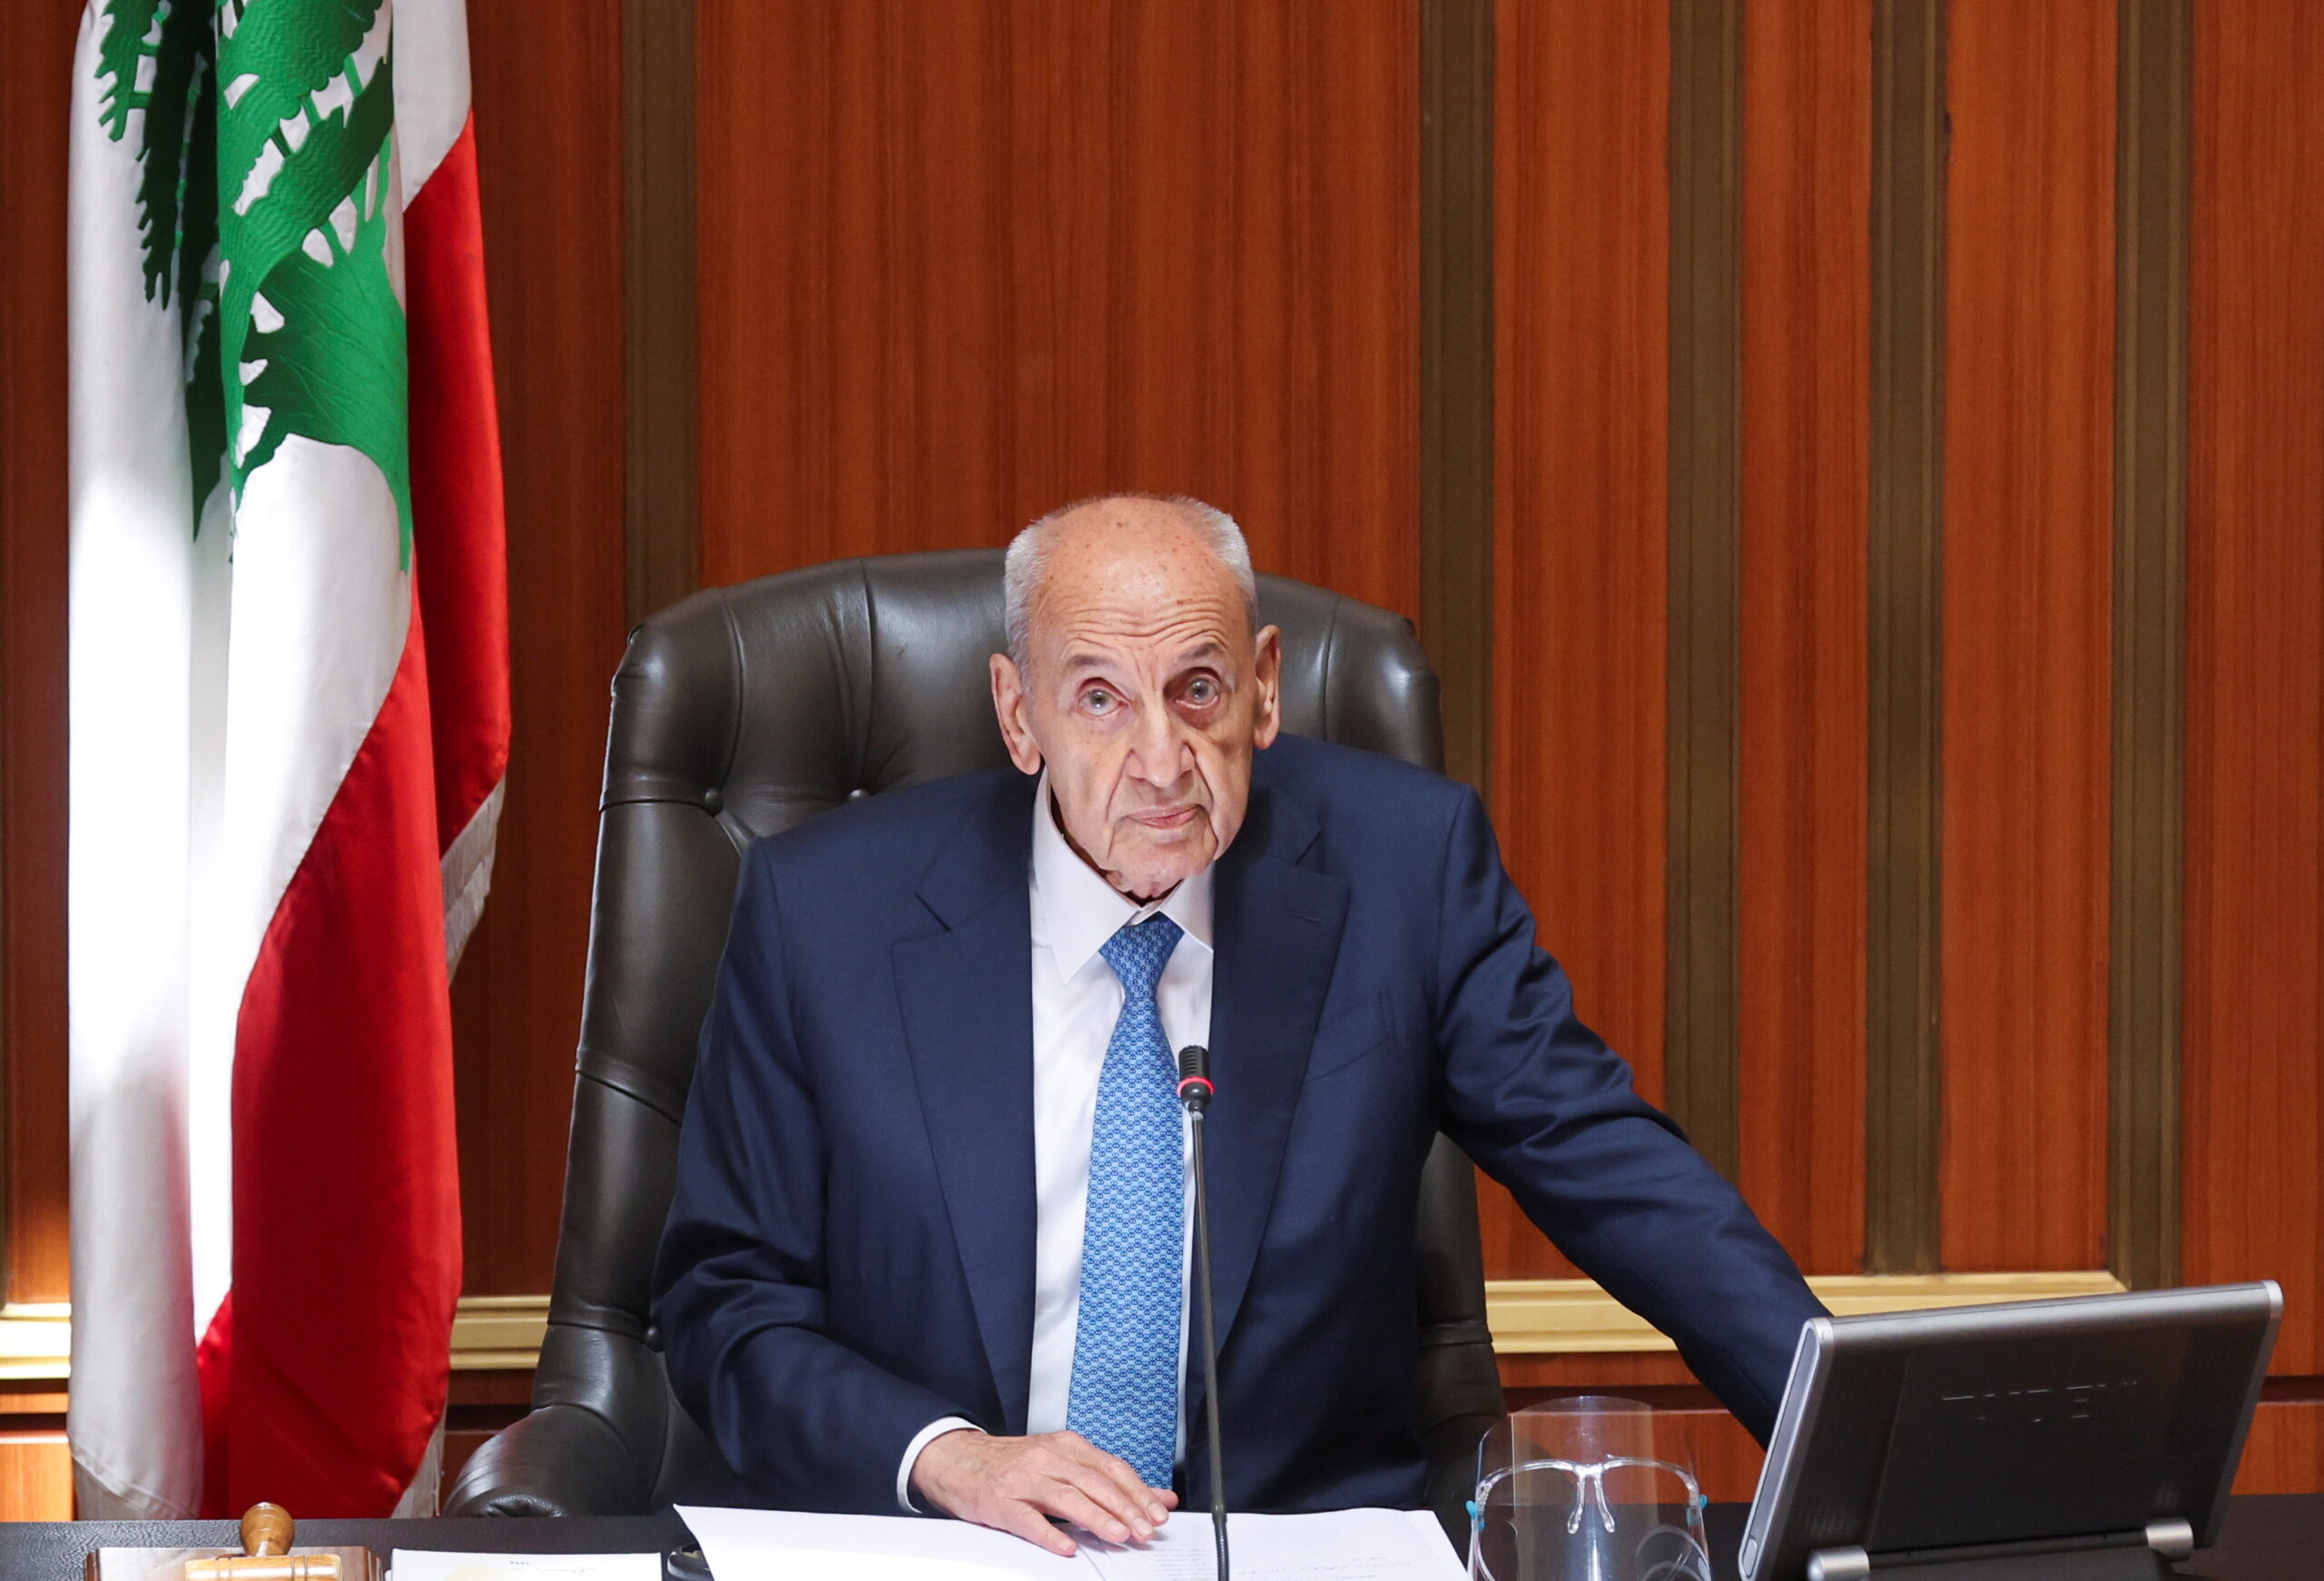 Re-elected Lebanon’s parliamentary speaker, Nabih Berri is pictured as Lebanon’s newly elected parliament convenes for the first time to elect a speaker and deputy speaker in Beirut